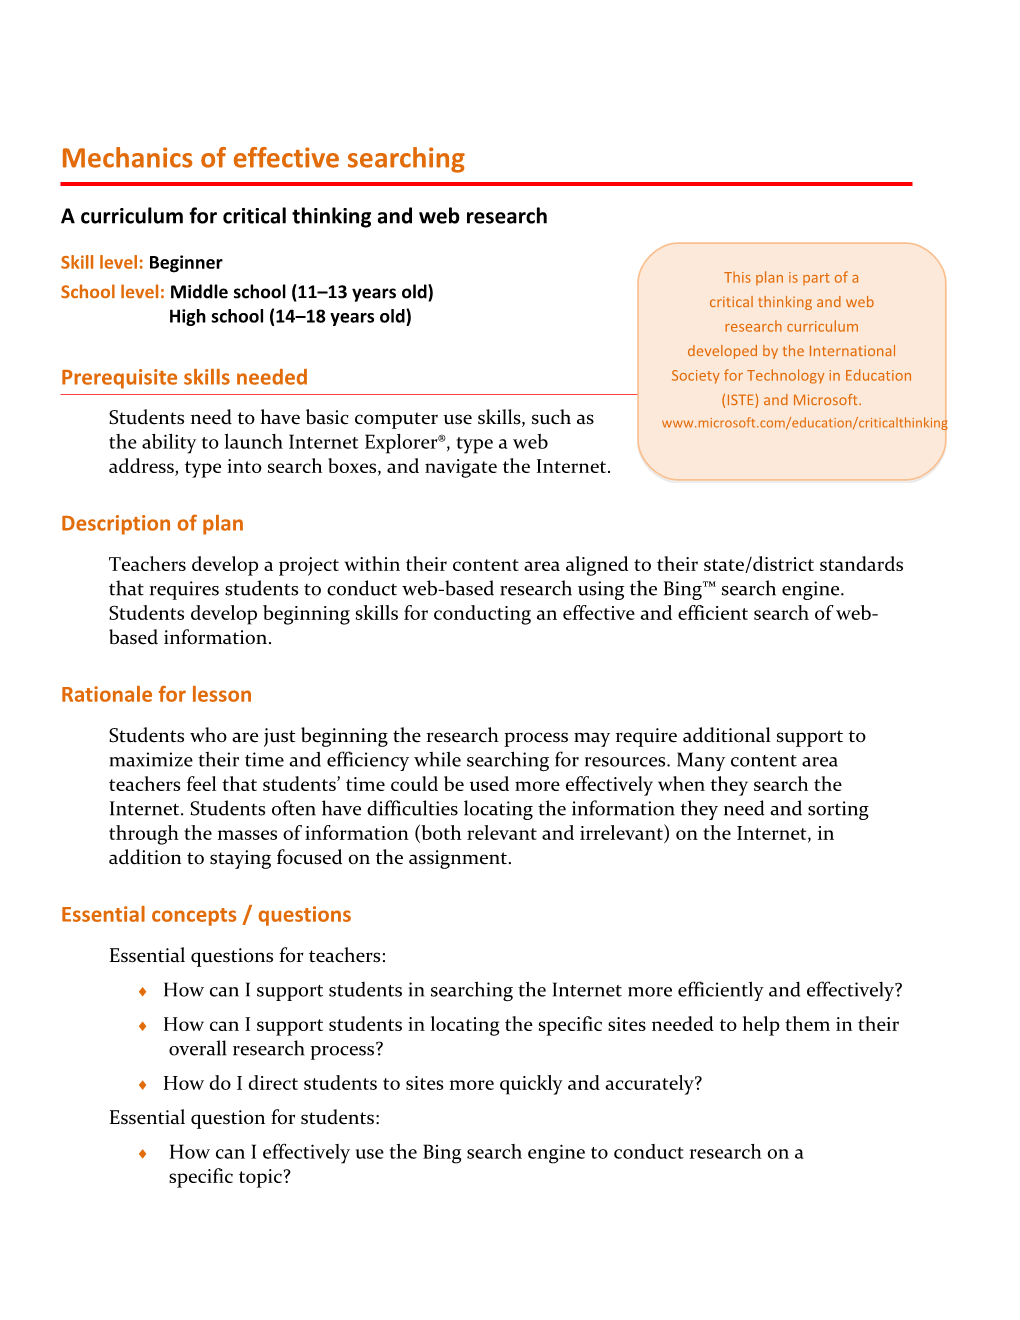 A Curriculum for Critical Thinking and Web Research